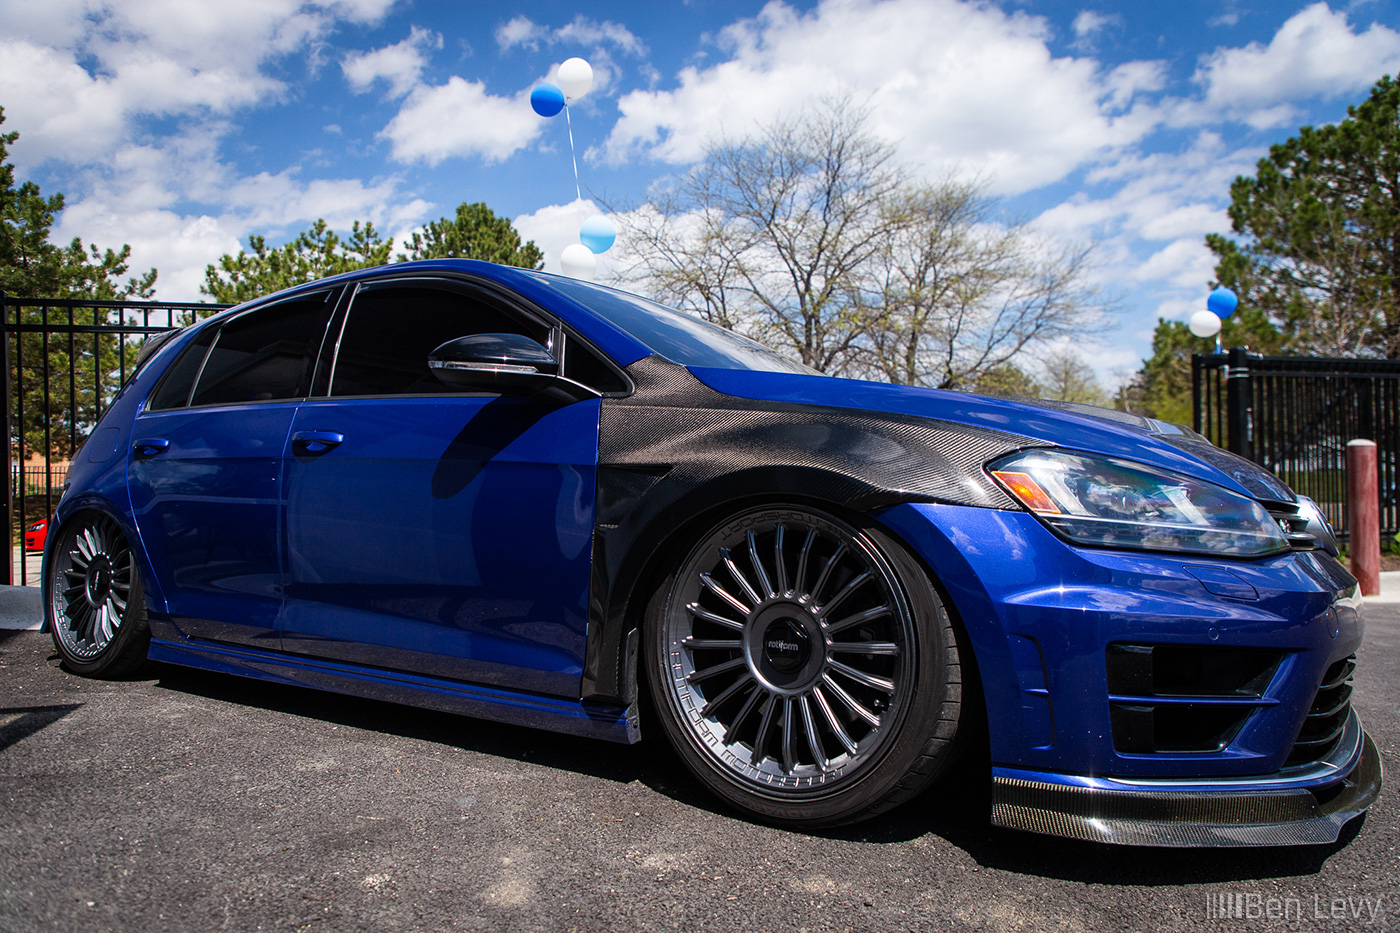 Aired-out Volkswagen Golf R with Carbon Fiber Fenders